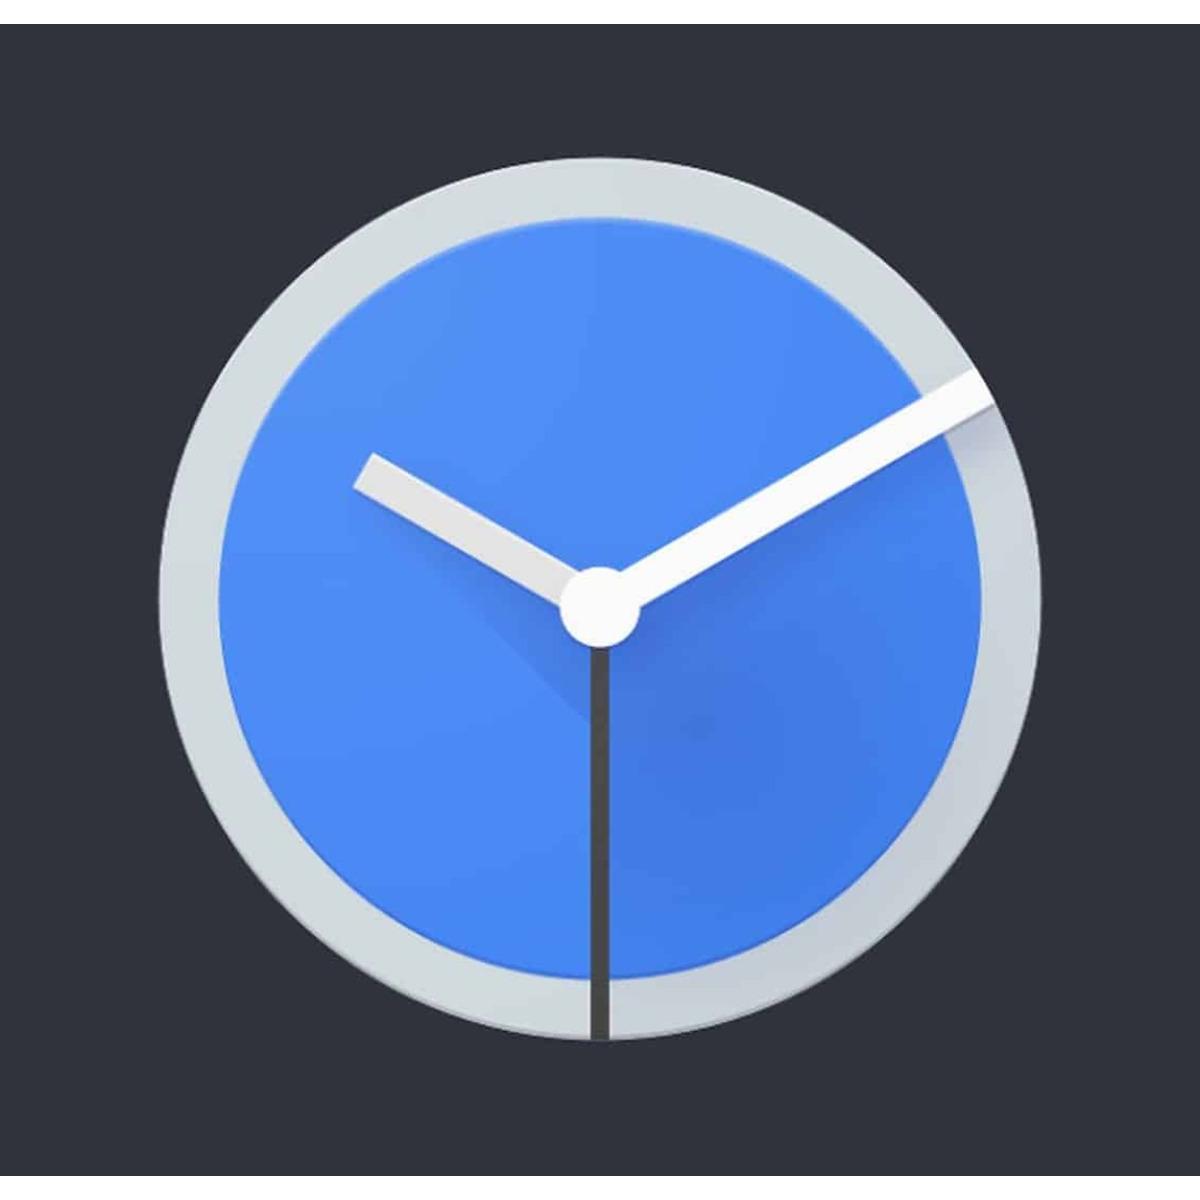 s Clock App Just Got Updated With More Features And